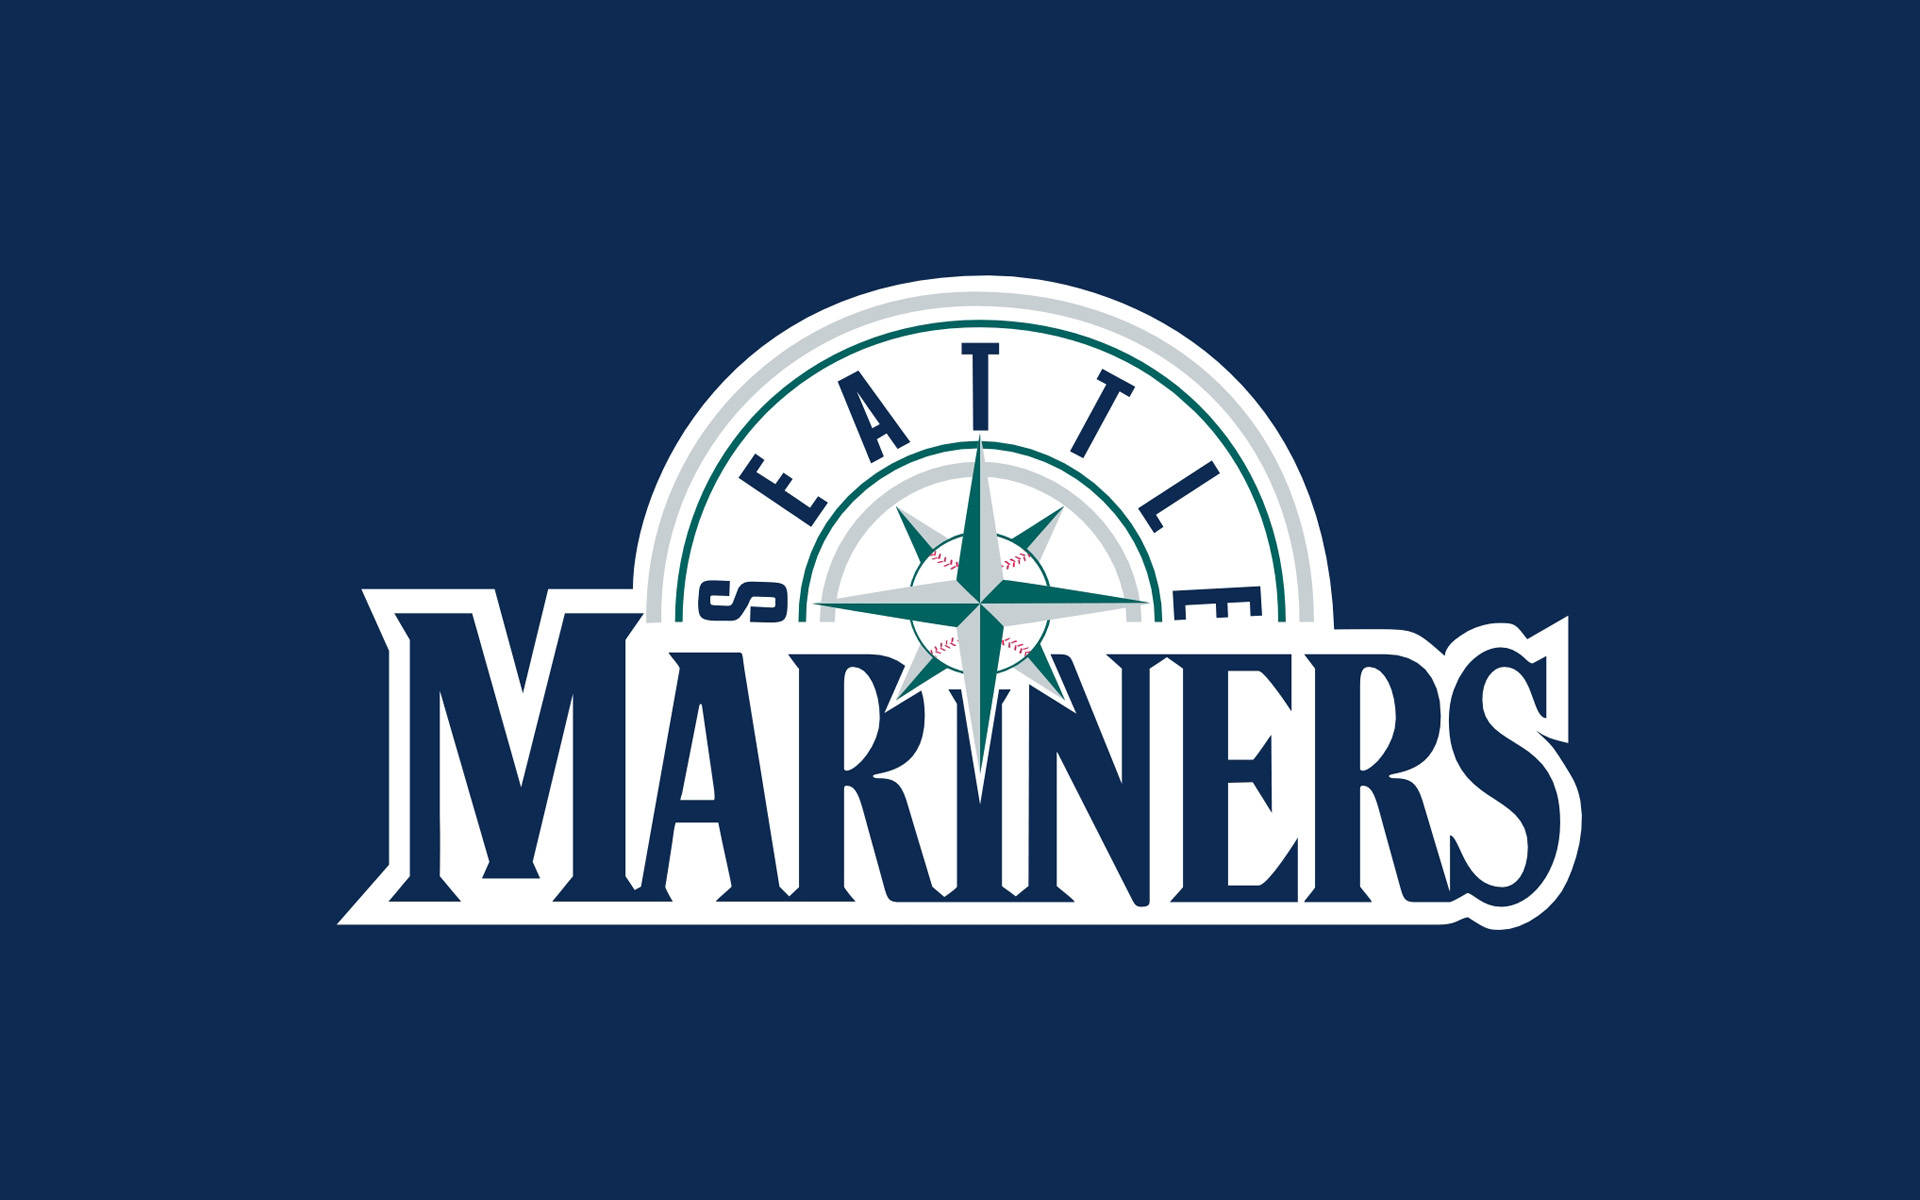 Seattle Mariners Large Text Wallpaper